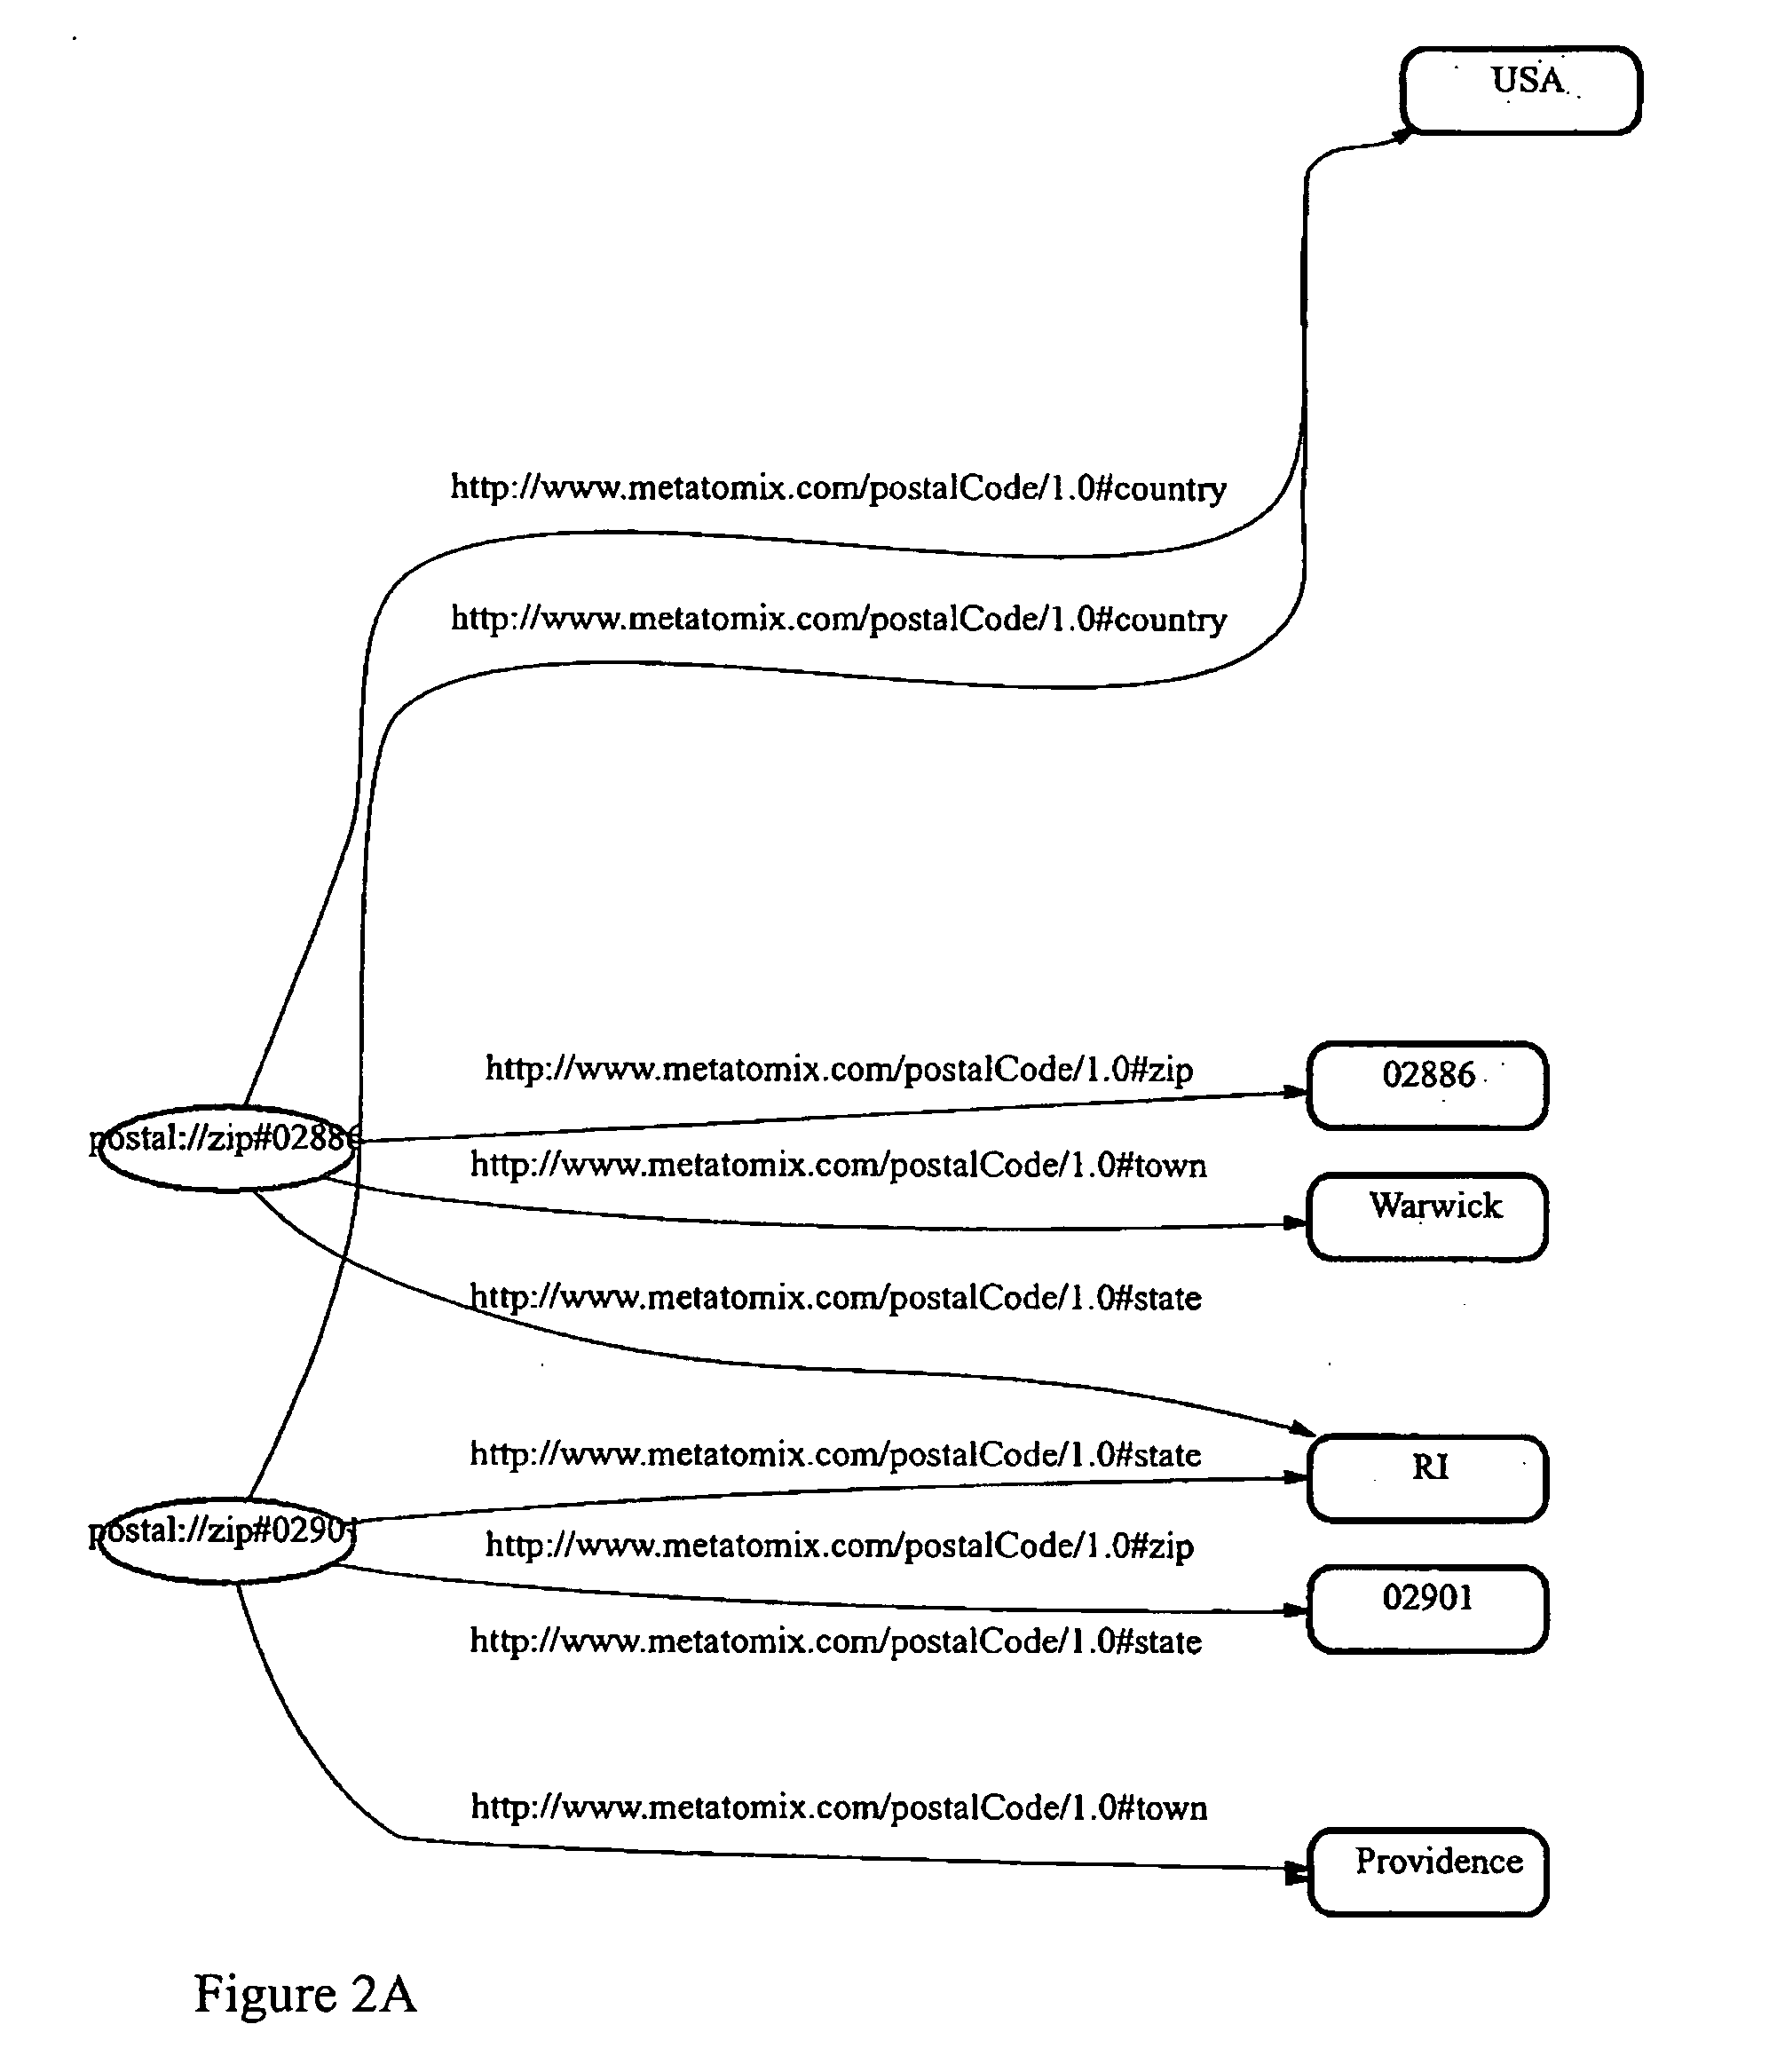 Methods and apparatus for visualizing relationships among triples of resource description framework (RDF) data sets